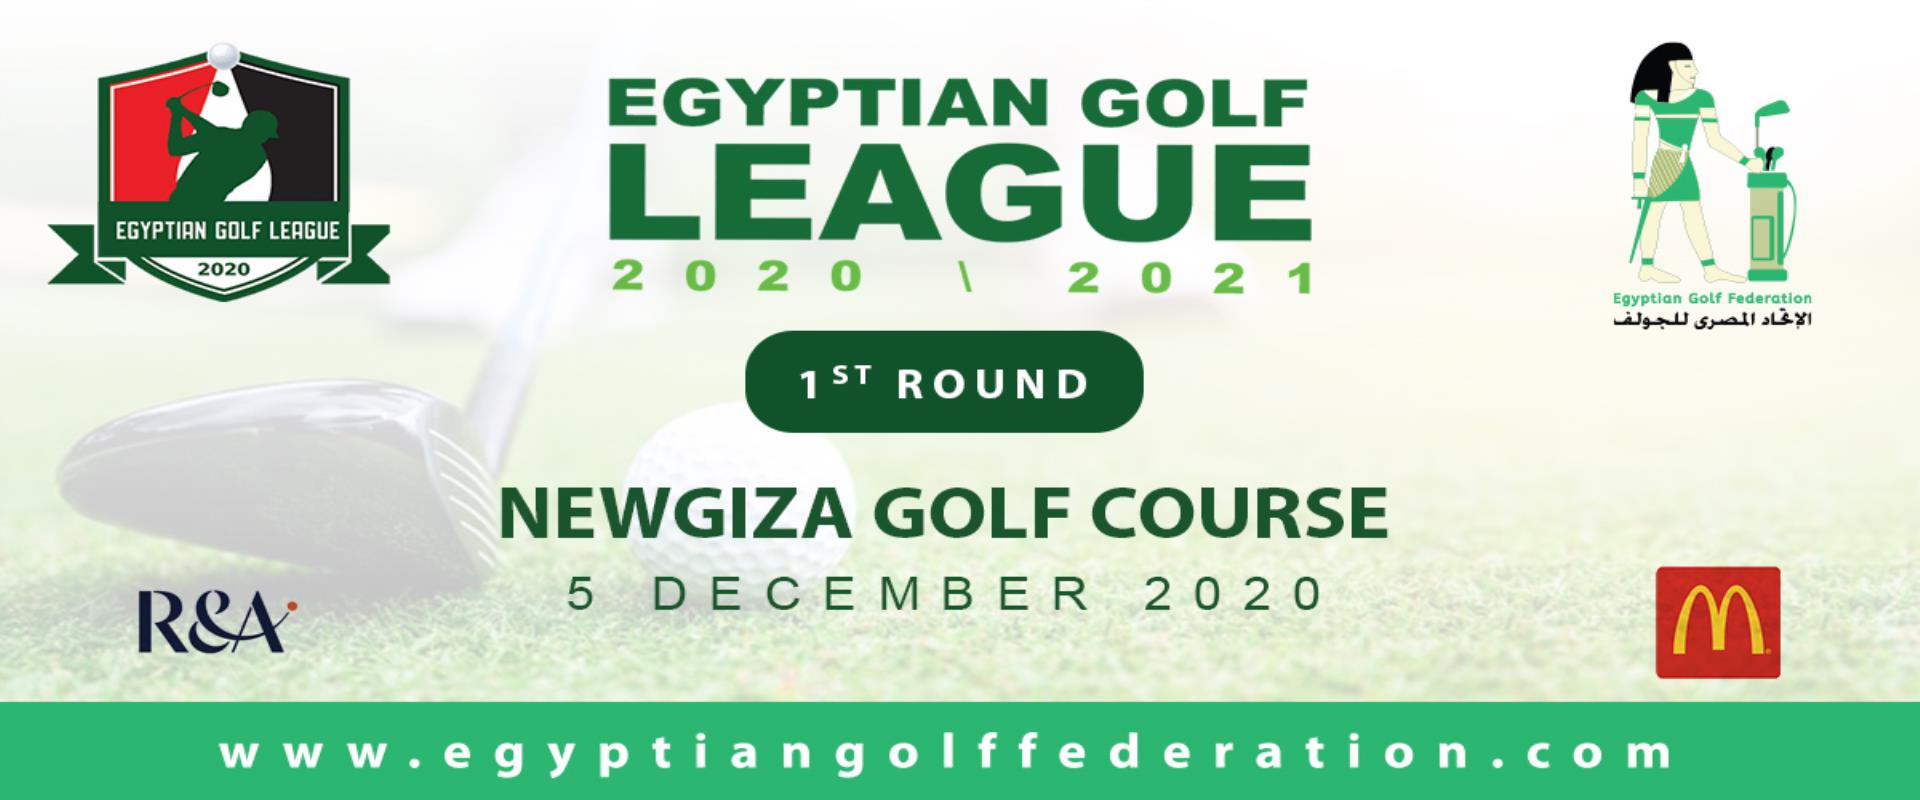 7 clubs compete for the Egyptian Golf League